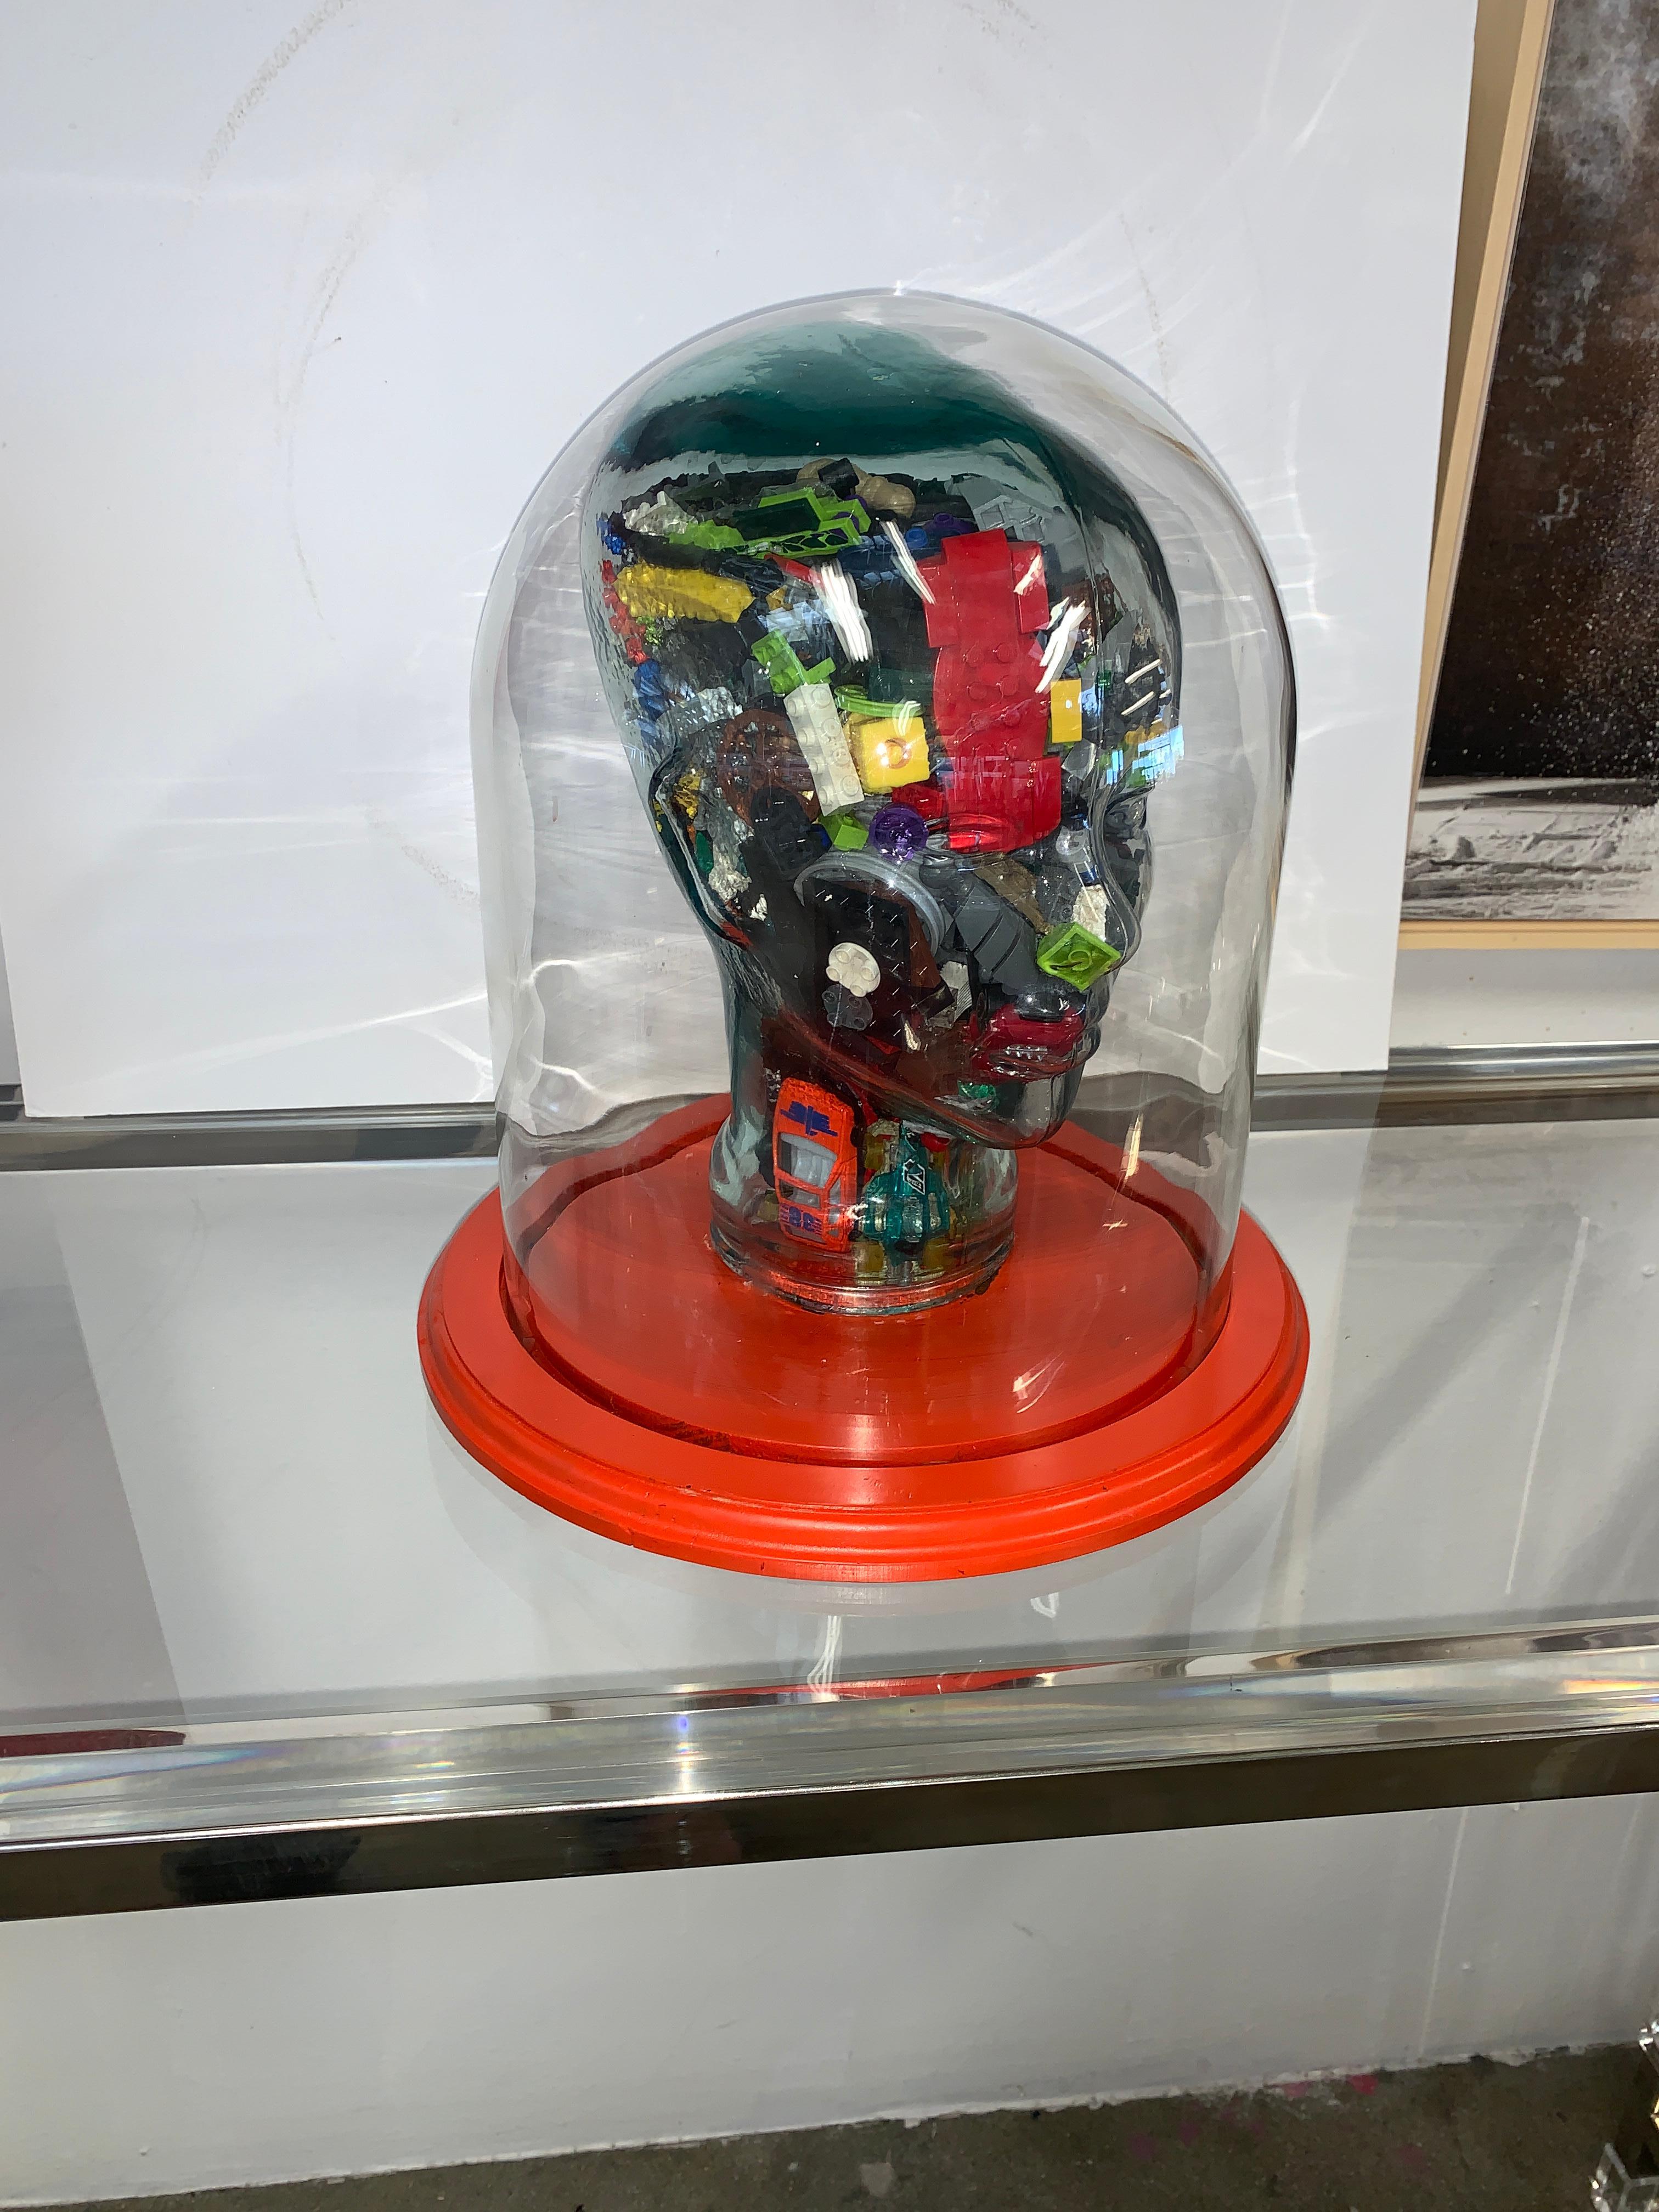 A Folk Art or Outsider Art bust under a glass dome. The glass bust is molded and it is filled with all sorts of found objects, including legos, chess pieces and blocks among other things. Likely late 20th or early 21st century. The base is a shade